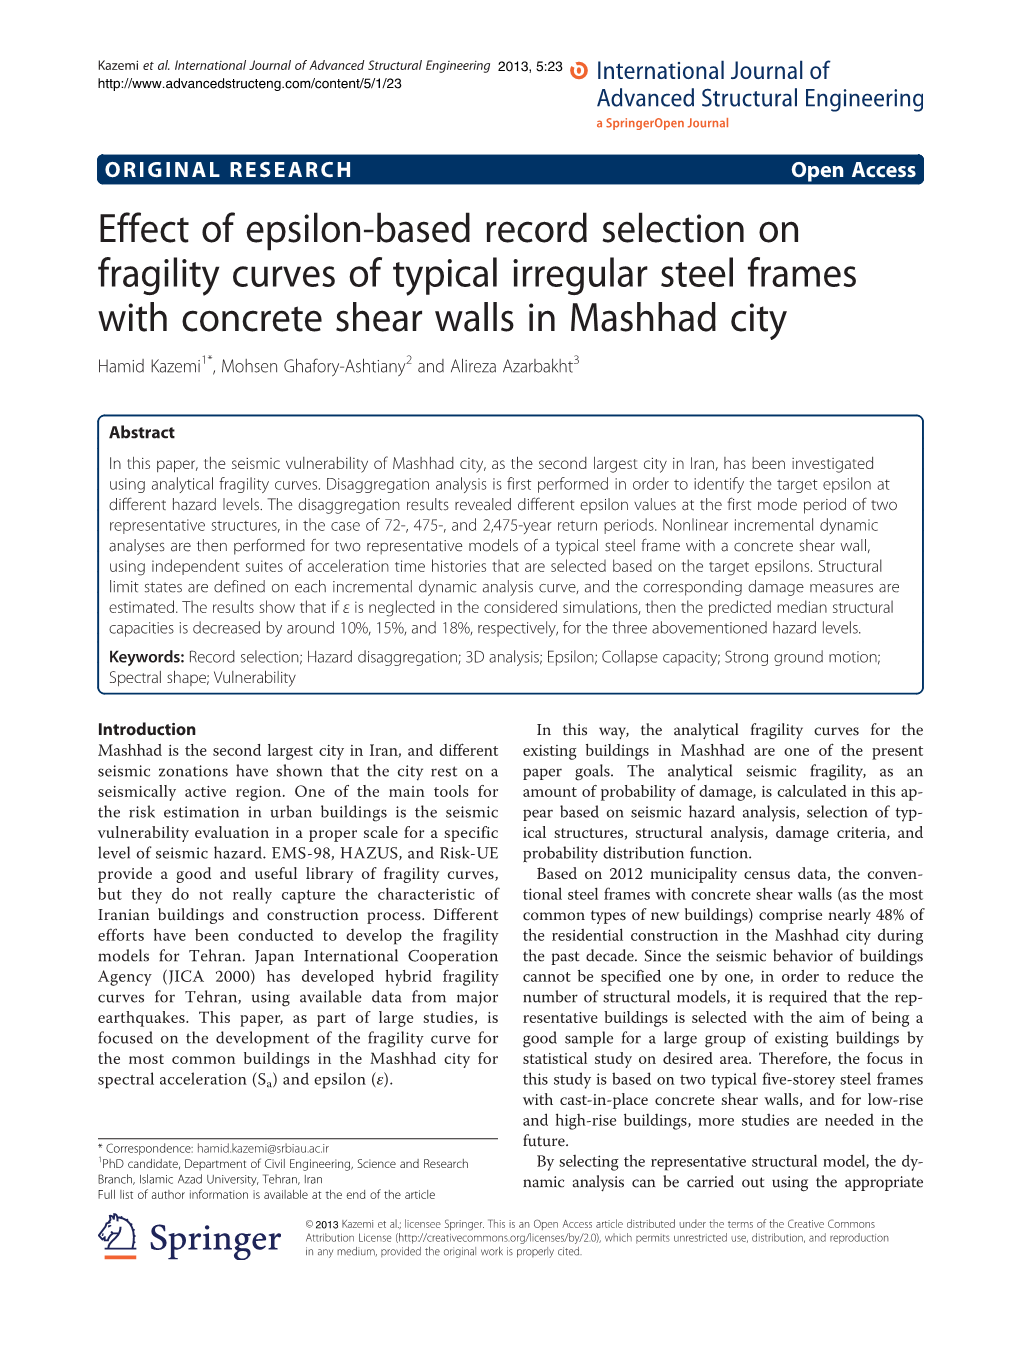 Effect of Epsilon-Based Record Selection on Fragility Curves Of